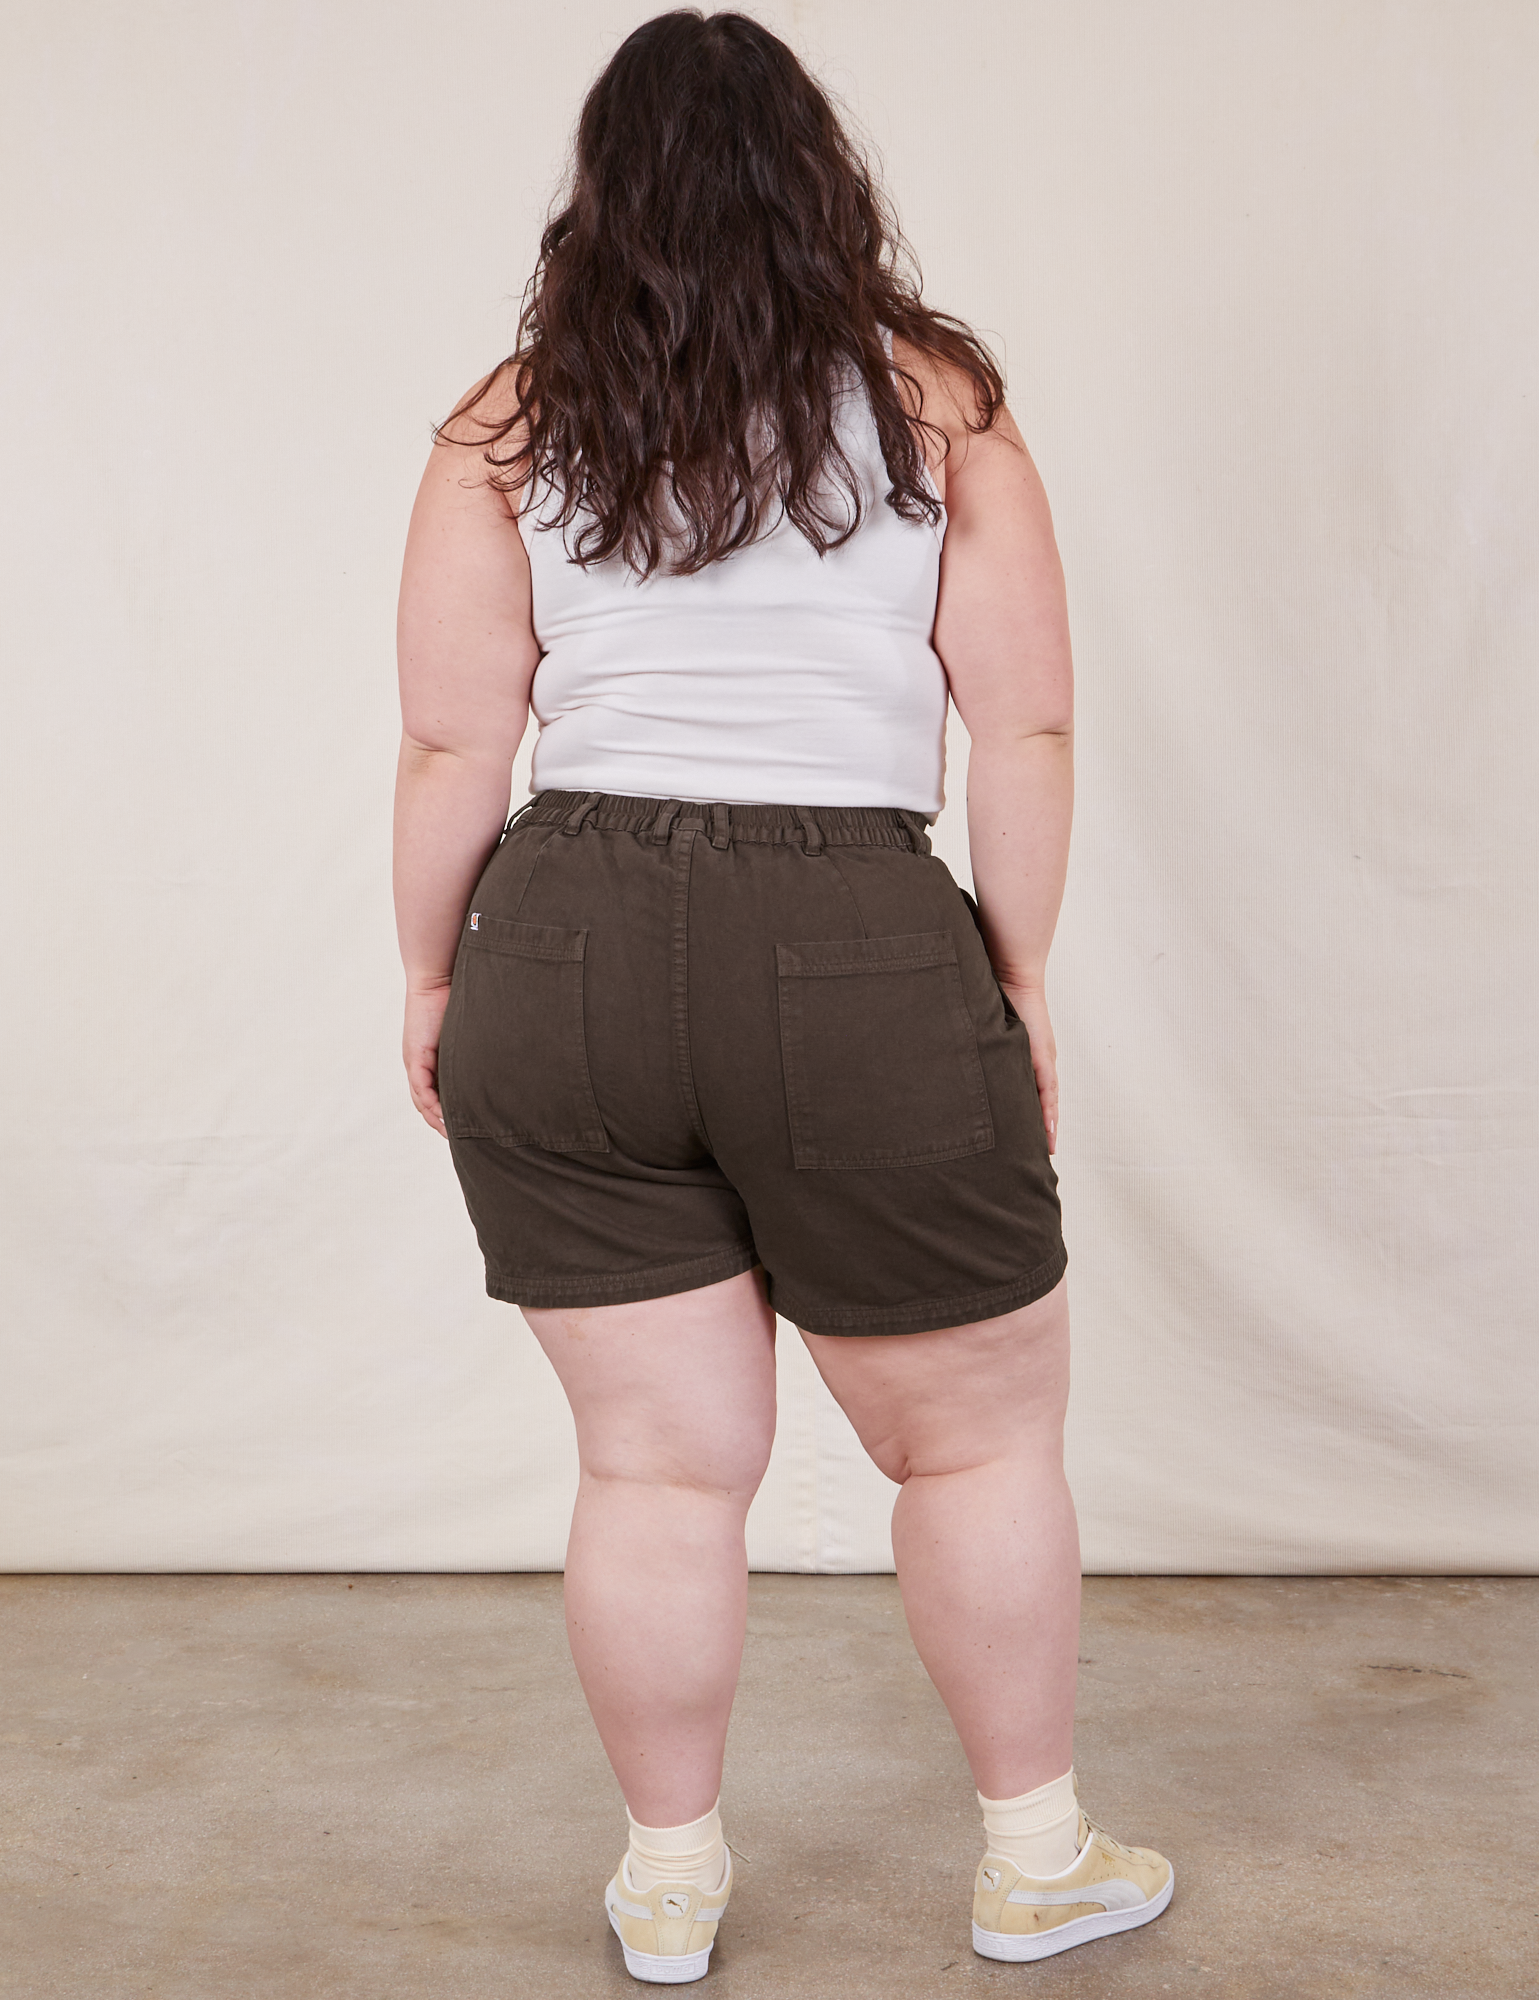 Back view of Classic Work Shorts in Espresso Brown and Cropped Tank Top in vintage tee off-white on Ashley